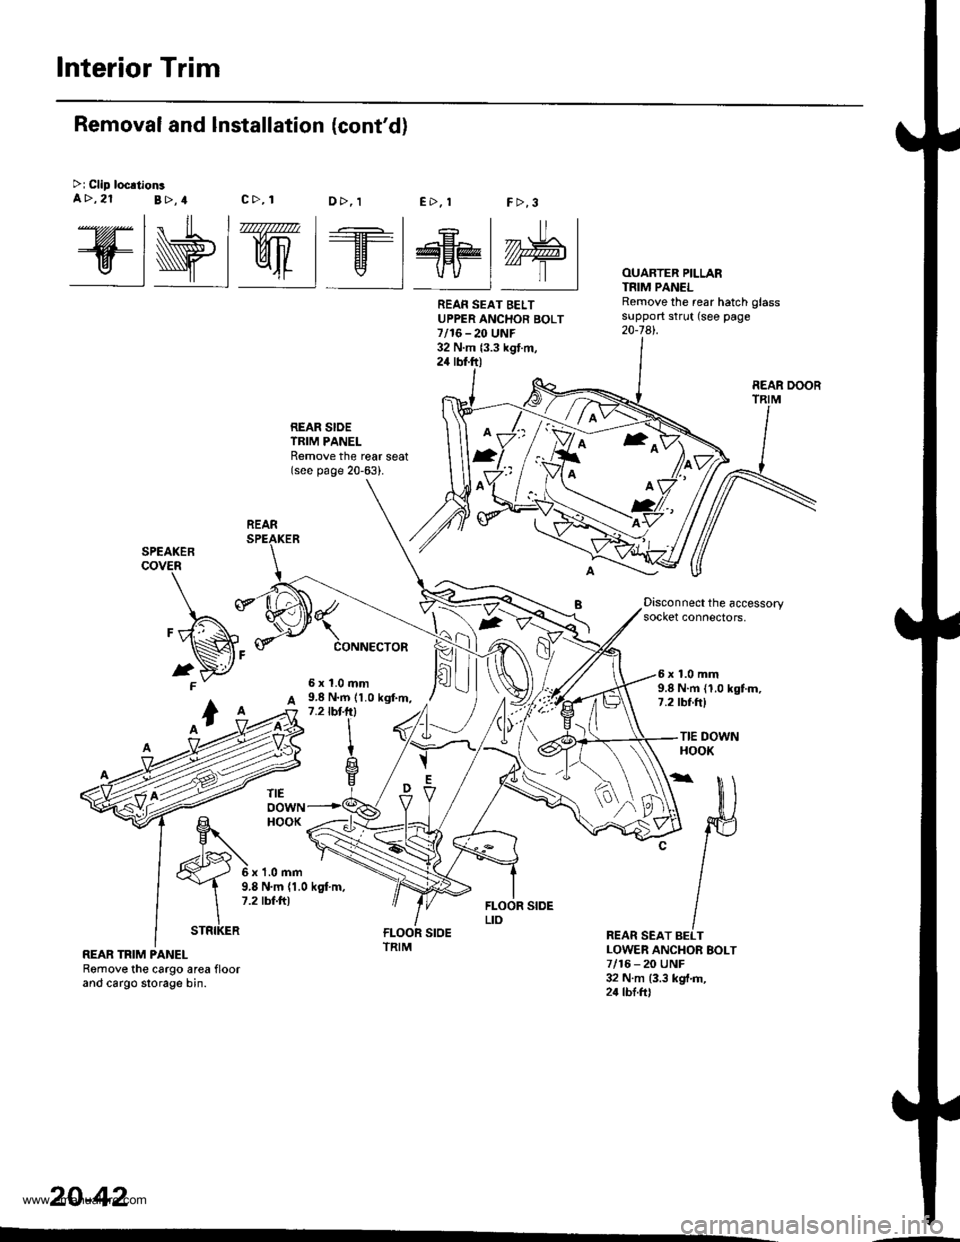 HONDA CR-V 1998 RD1-RD3 / 1.G Workshop Manual 
Interior Trim
@wt we@M
REAR SIOETRIM PANELRemove the reat seat(see page 20-63).
FCONNECTOR
2
OUARTER PILLARTNIM PANELRemove the rear hatch glasssupport strut (see page20-741.
Removal and Installation